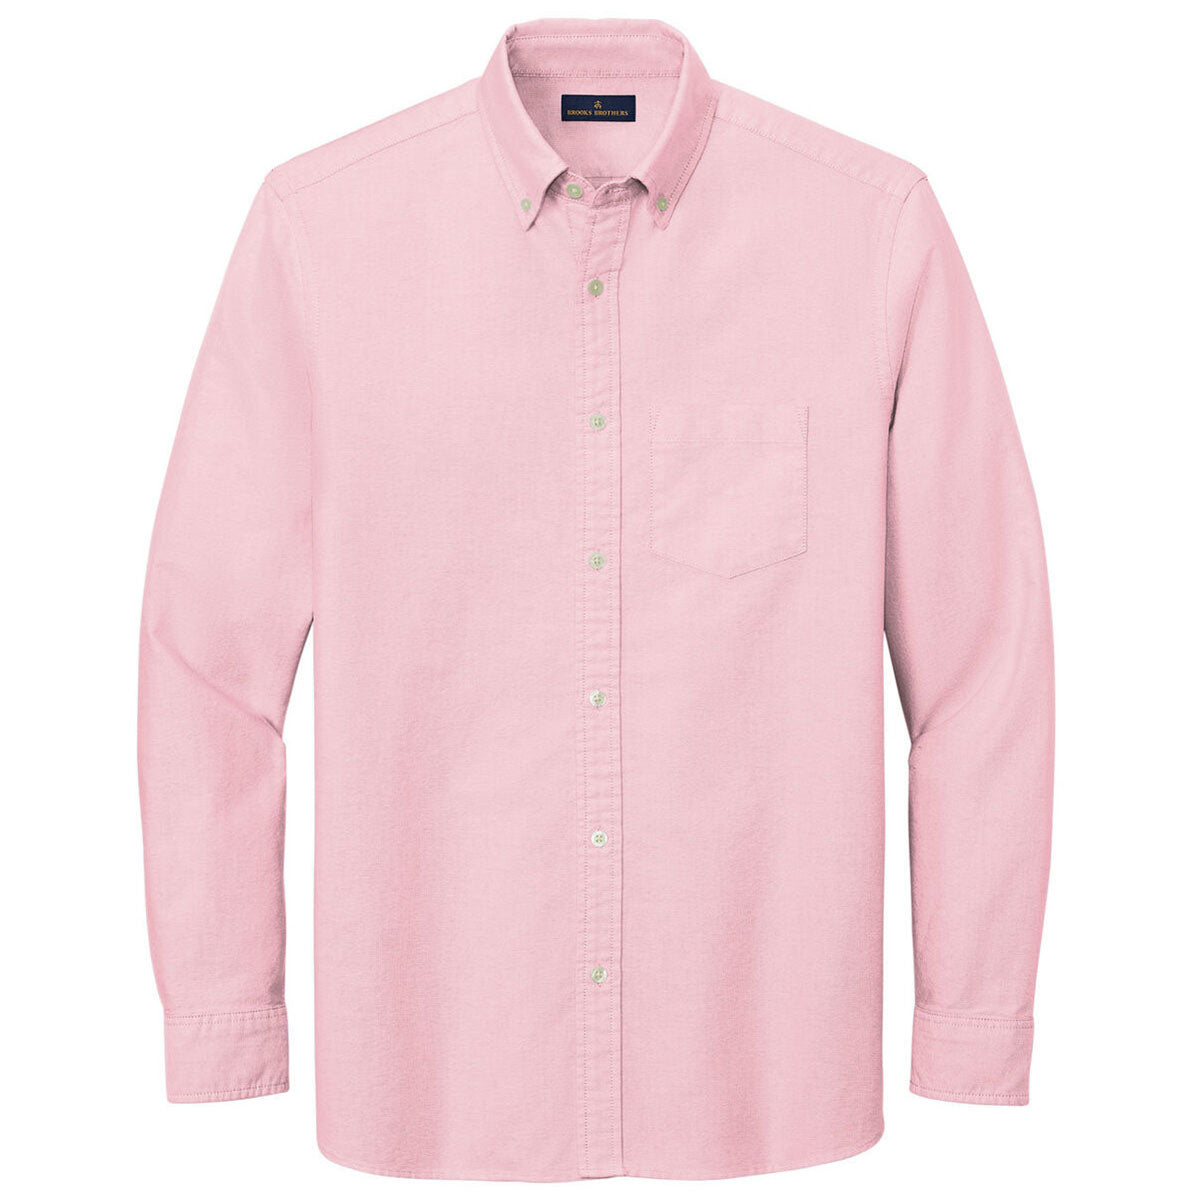 Real Men Wear Pink (And Not Just Brooks Brothers Button-Downs) - WSJ